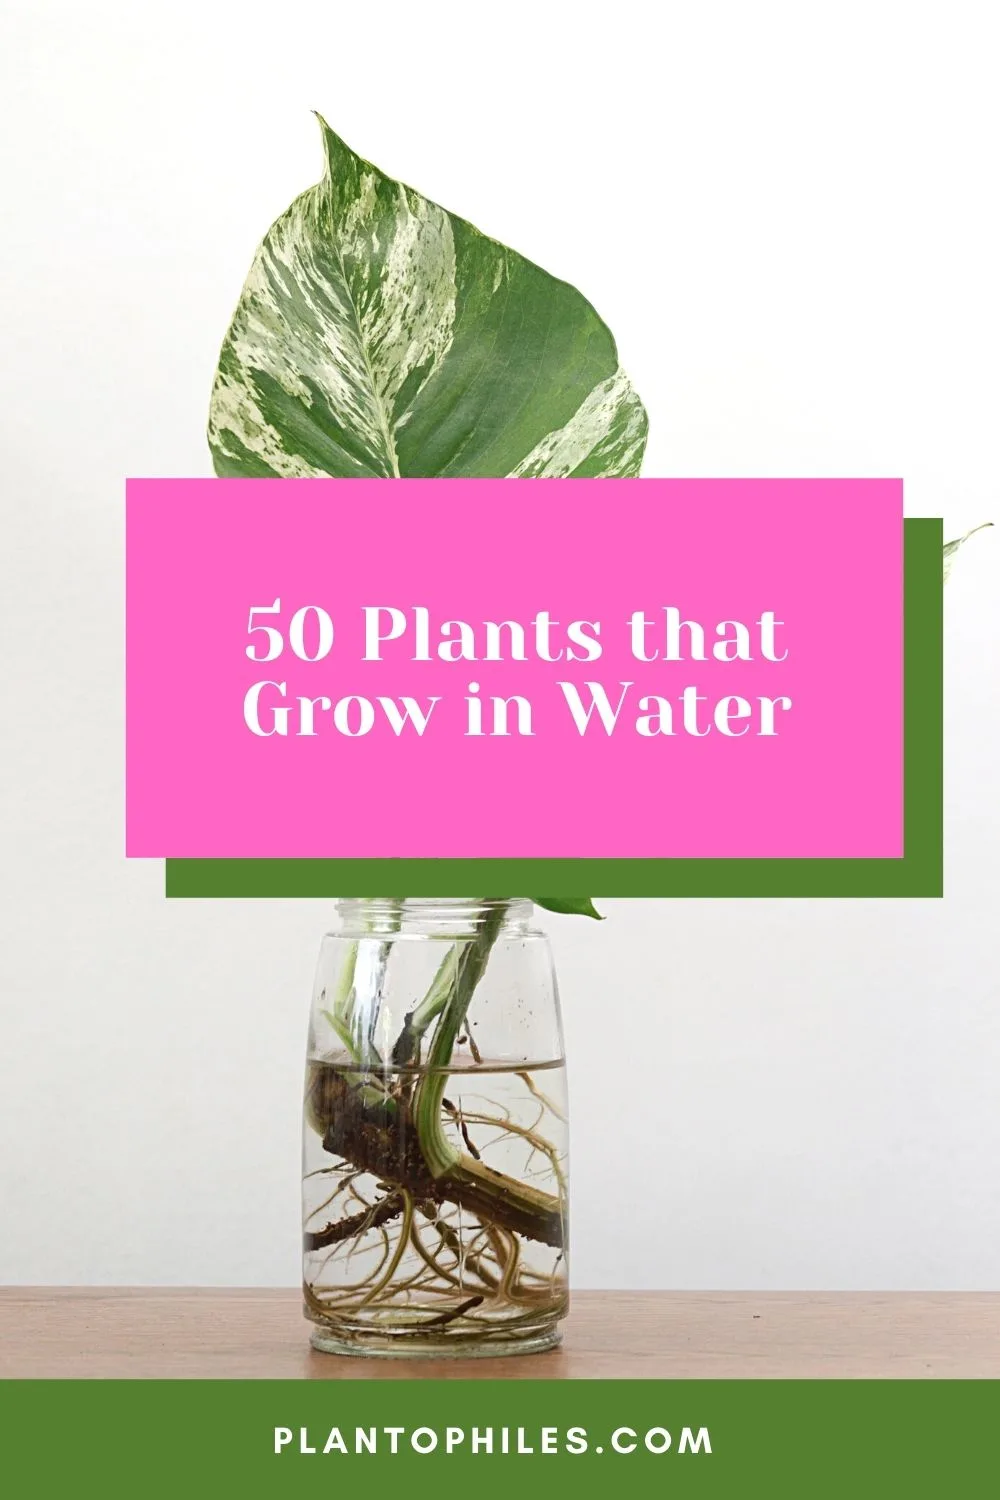 50 Plants that Grow in Water